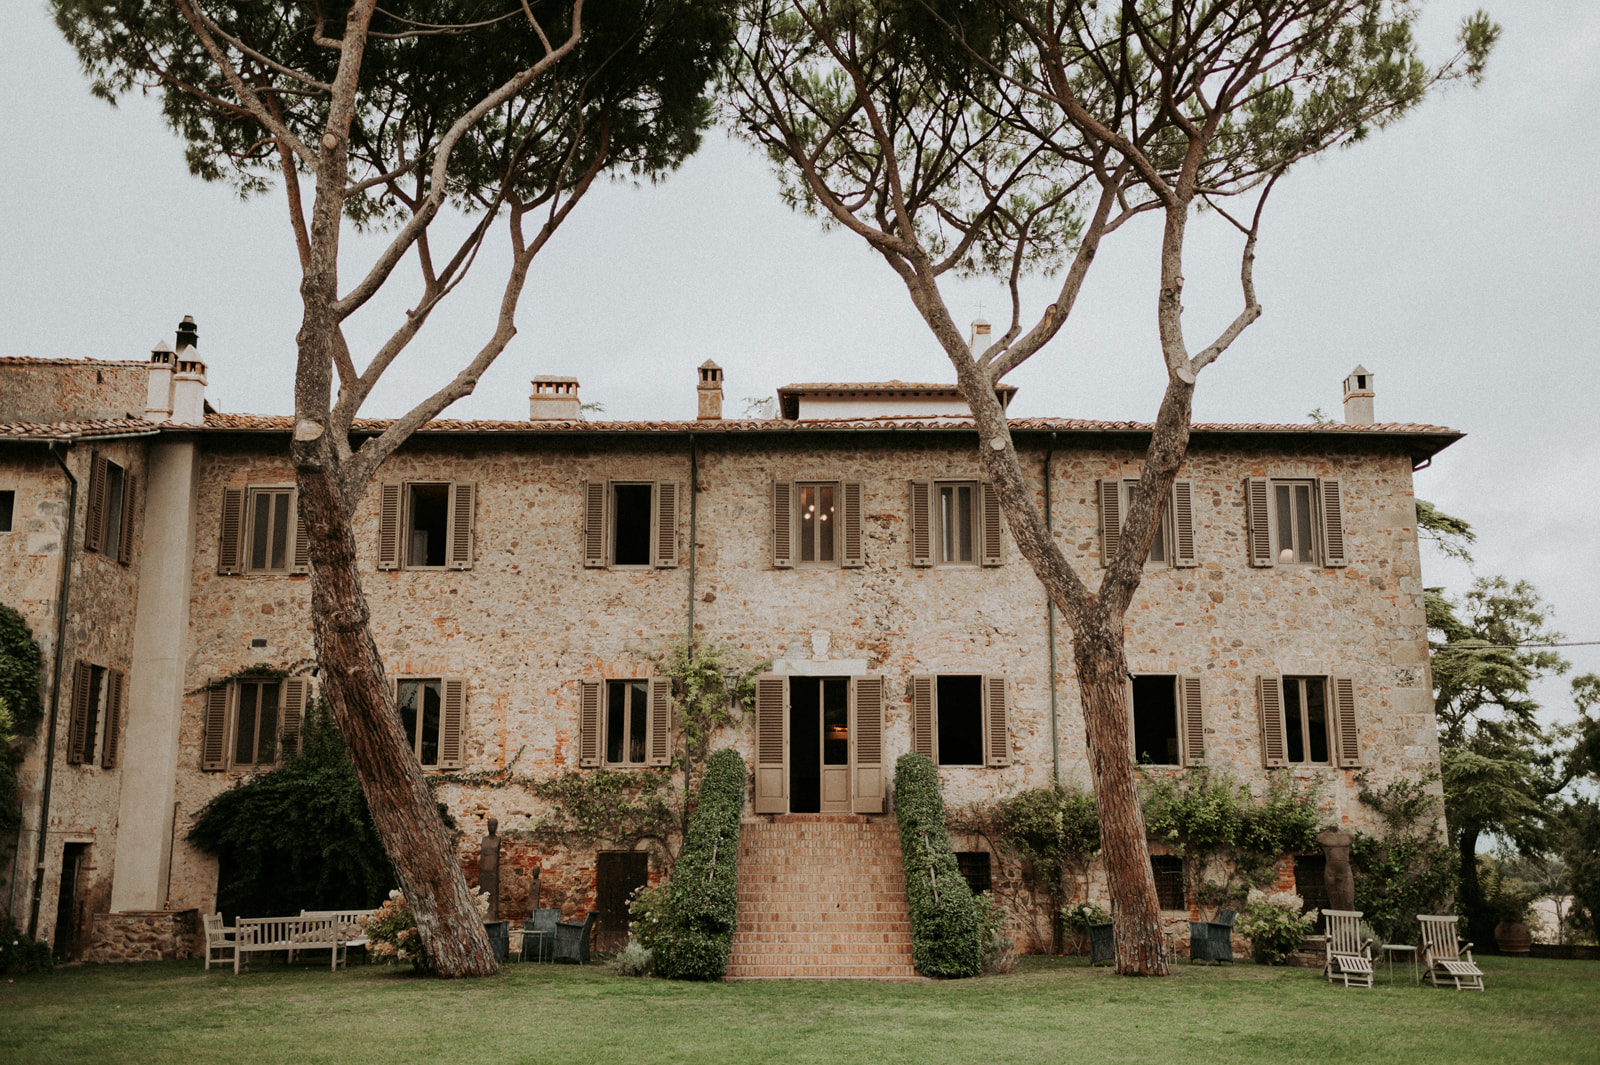 La Pescaia Resort, the most beautiful location for your wedding in Tuscany Italy